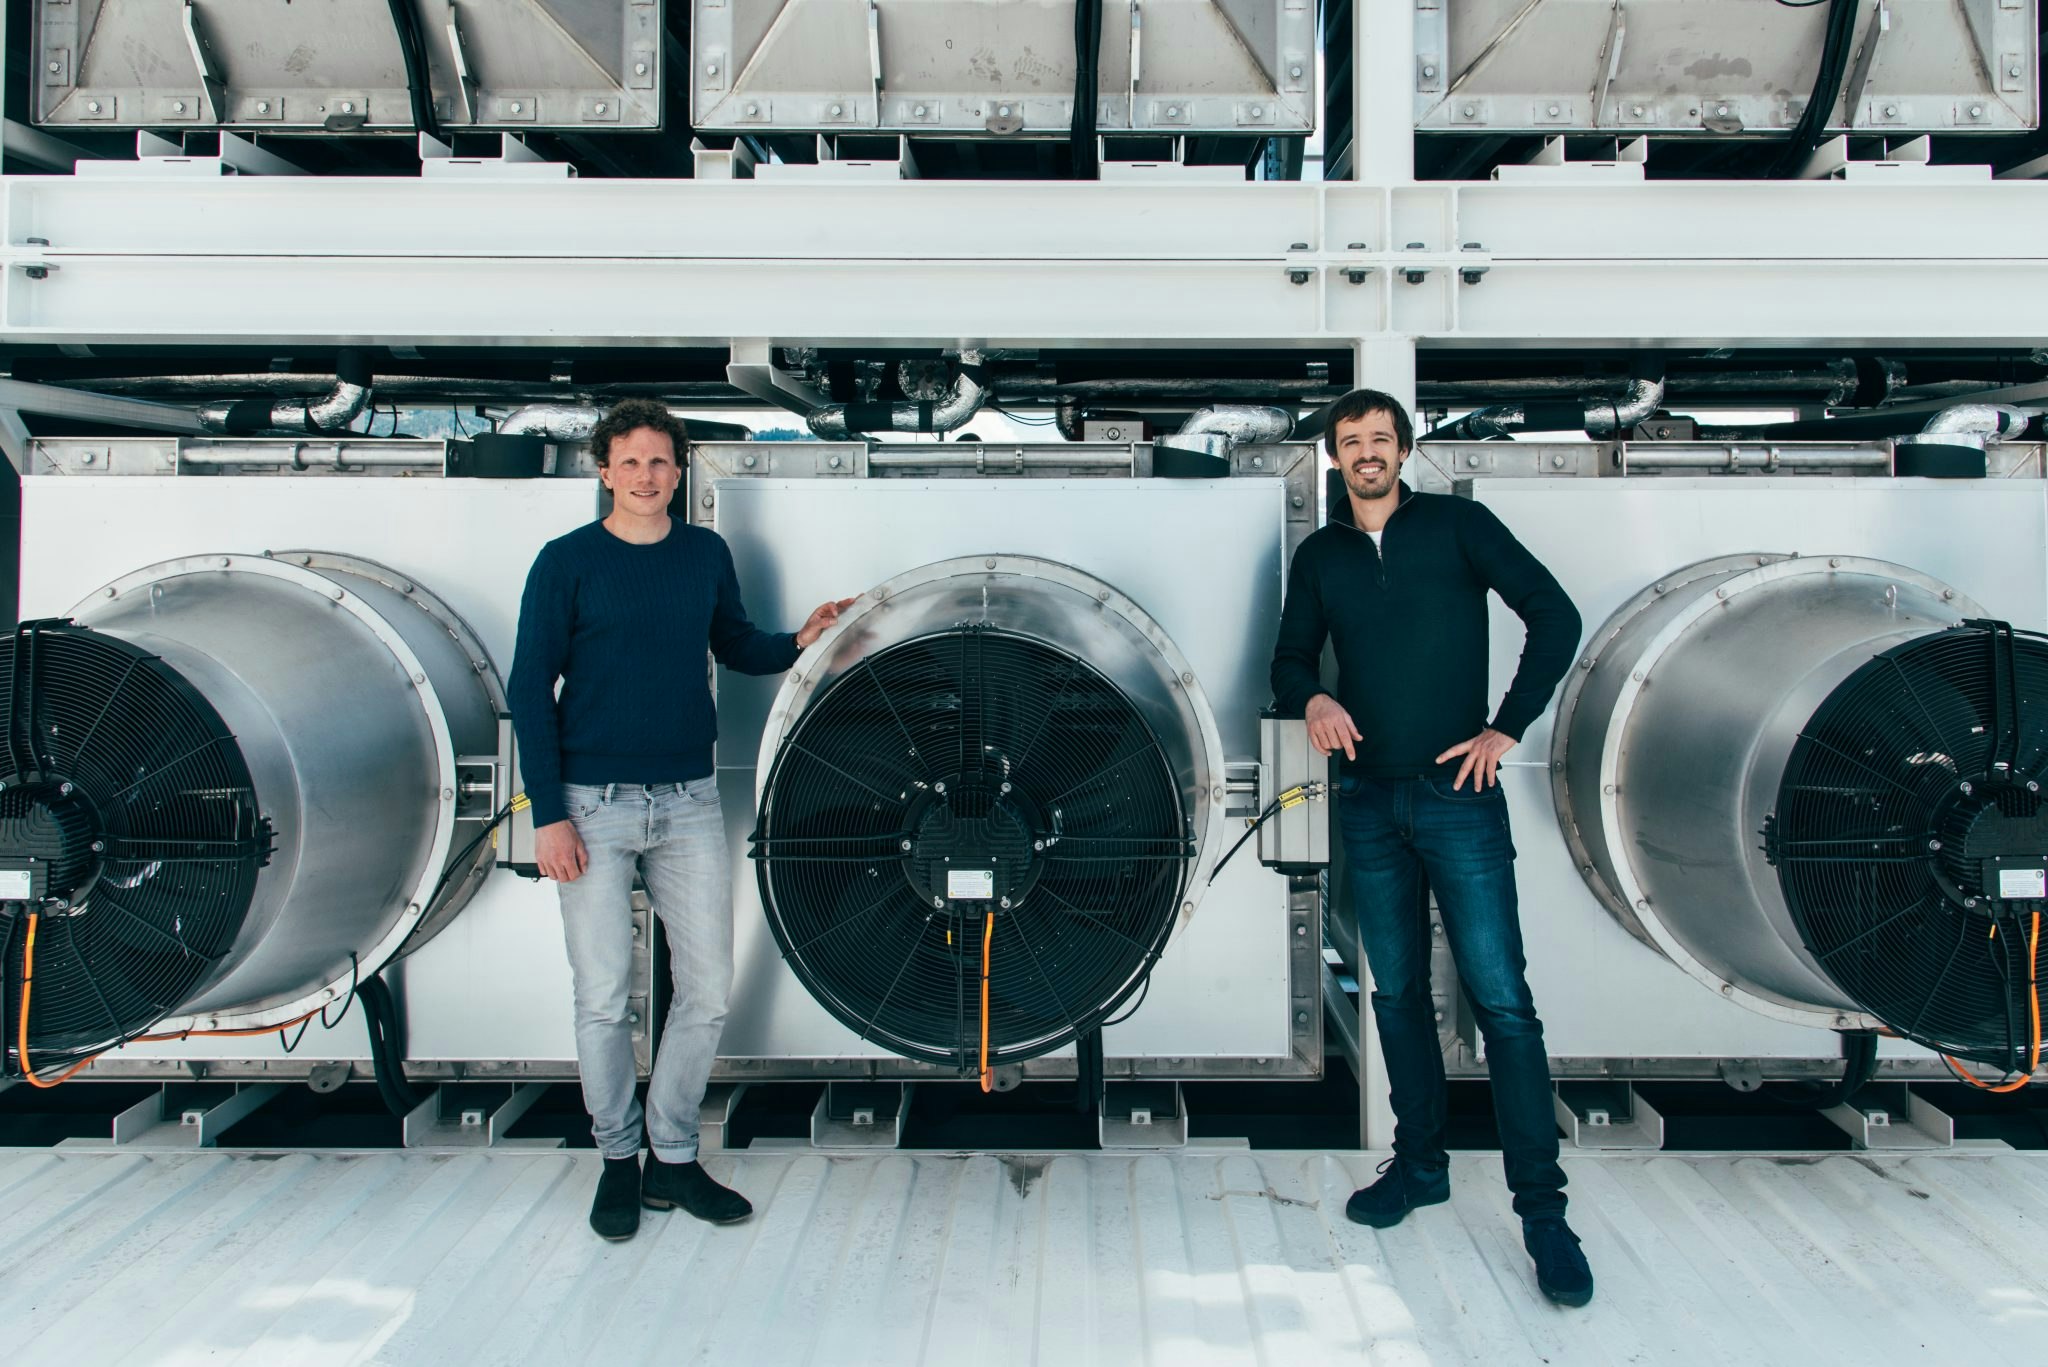 Climeworks founders C. Gebald and J. Wurzbacher in front of Climeworks plant in Switzerland.